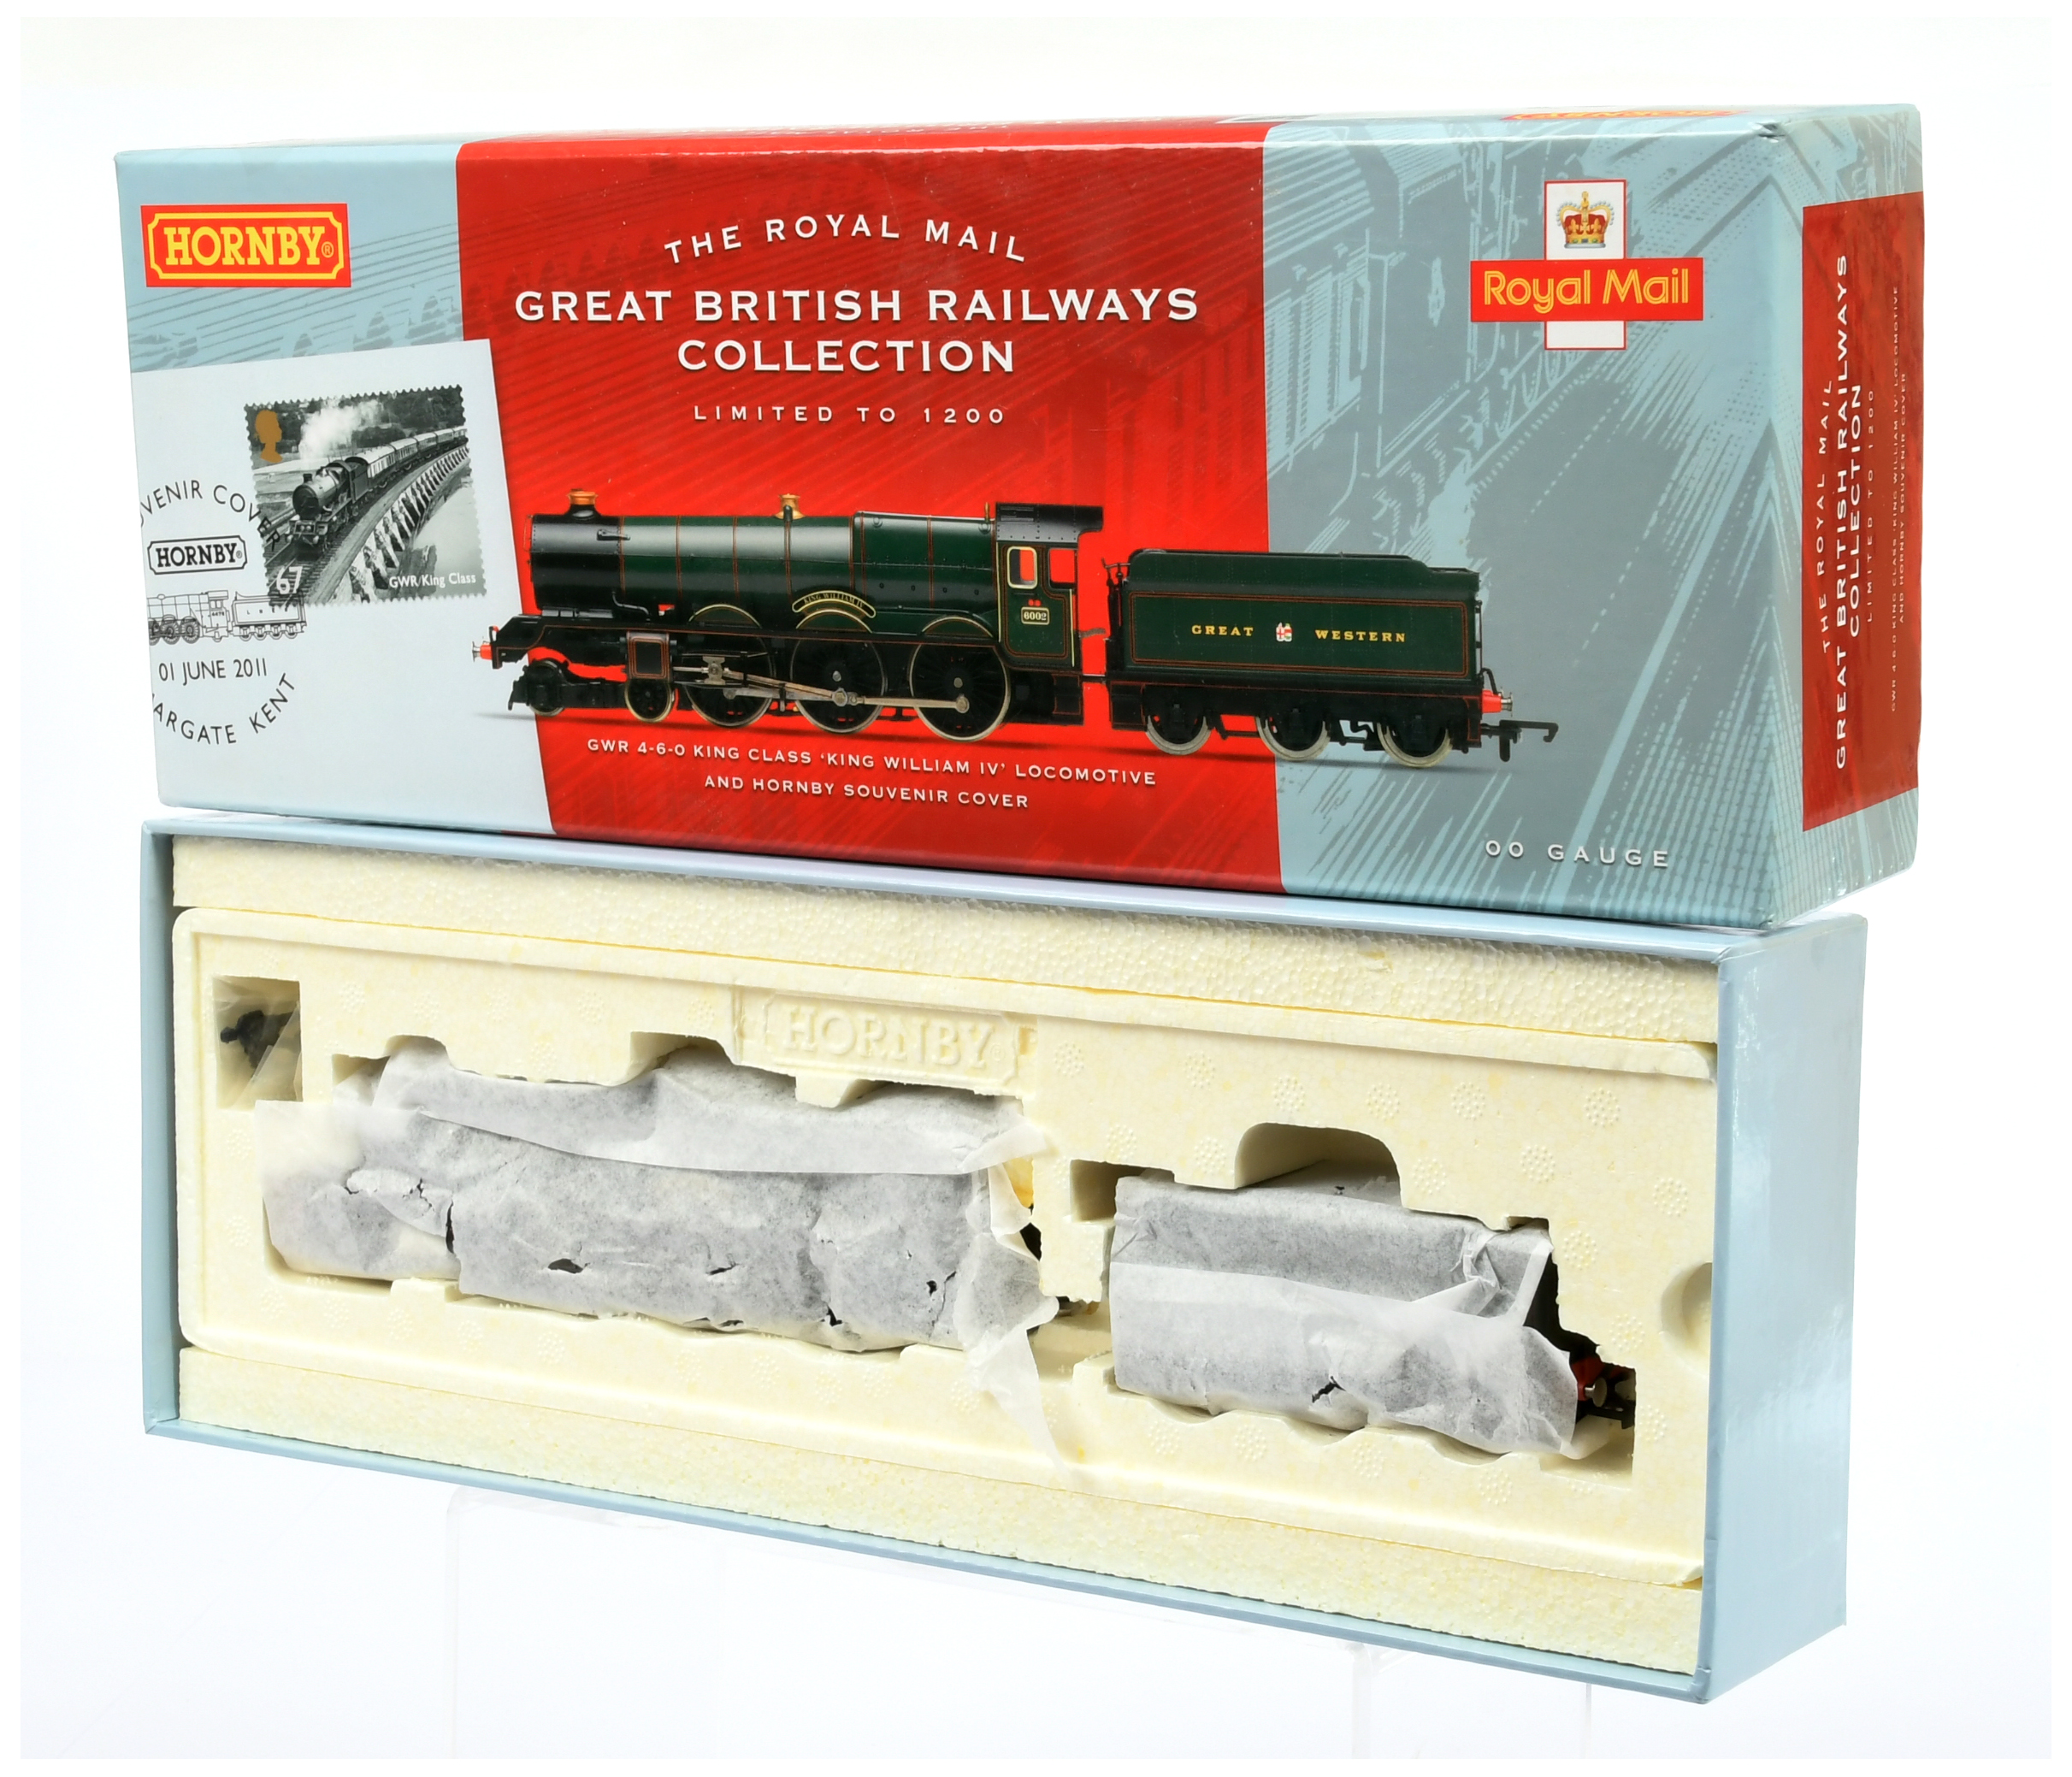 Hornby (China) R3074 (limited edition) 4-6-0 GWR green King Class No.6002 "King William IV"